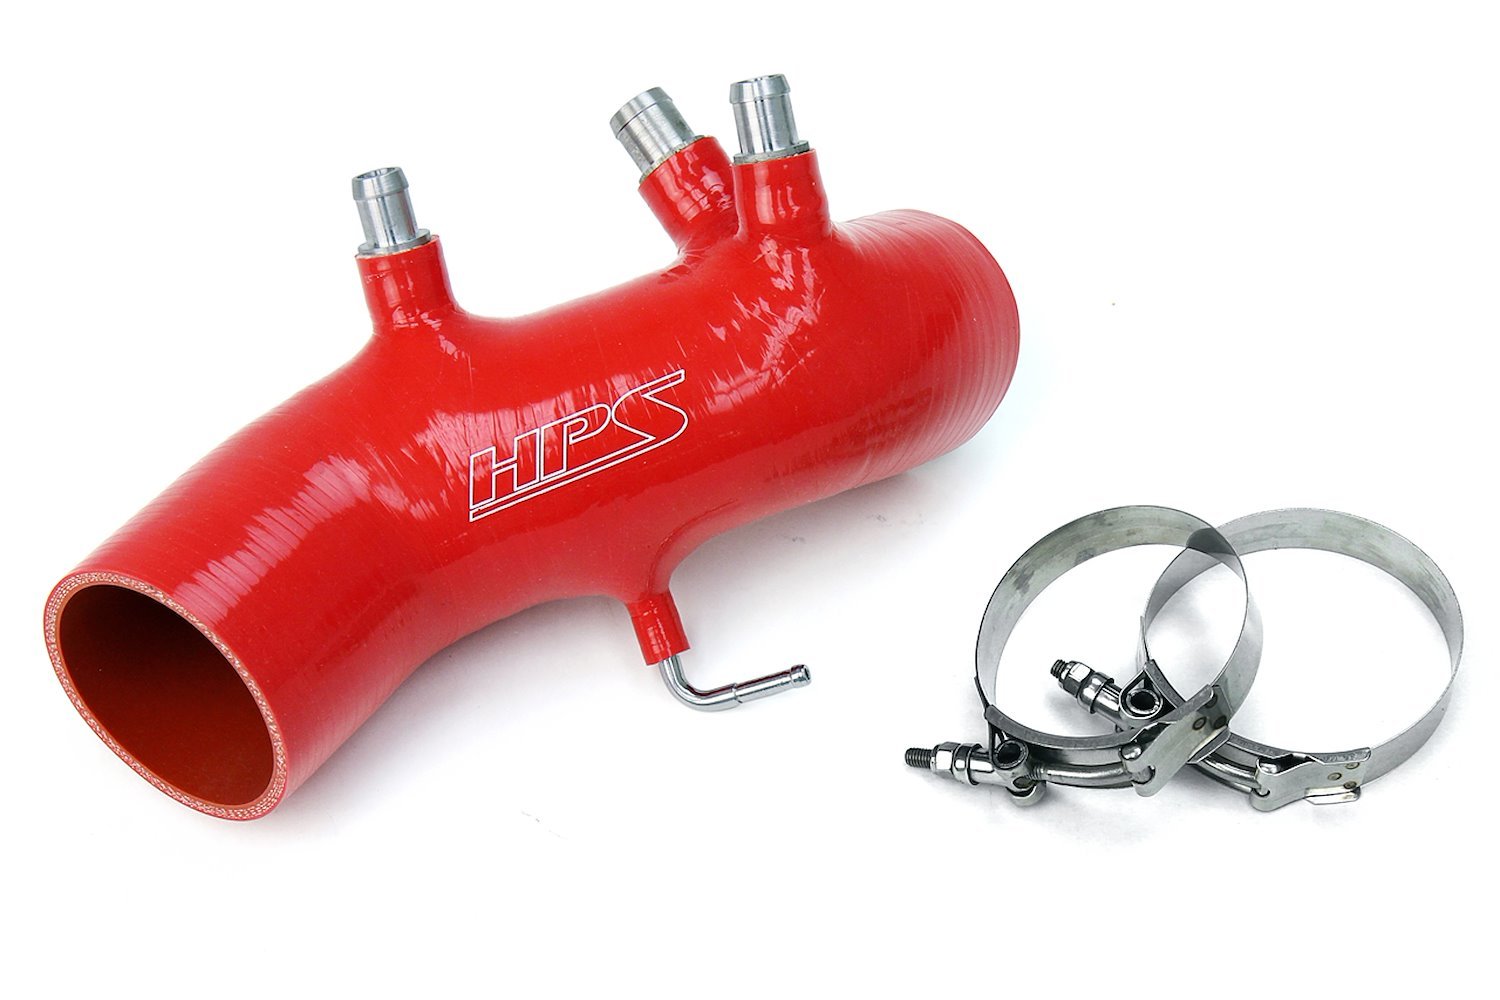 87-17882-RED Silicone Air Intake, Replace Stock Restrictive Air Intake, Improve Throttle Response, No Heat Soak